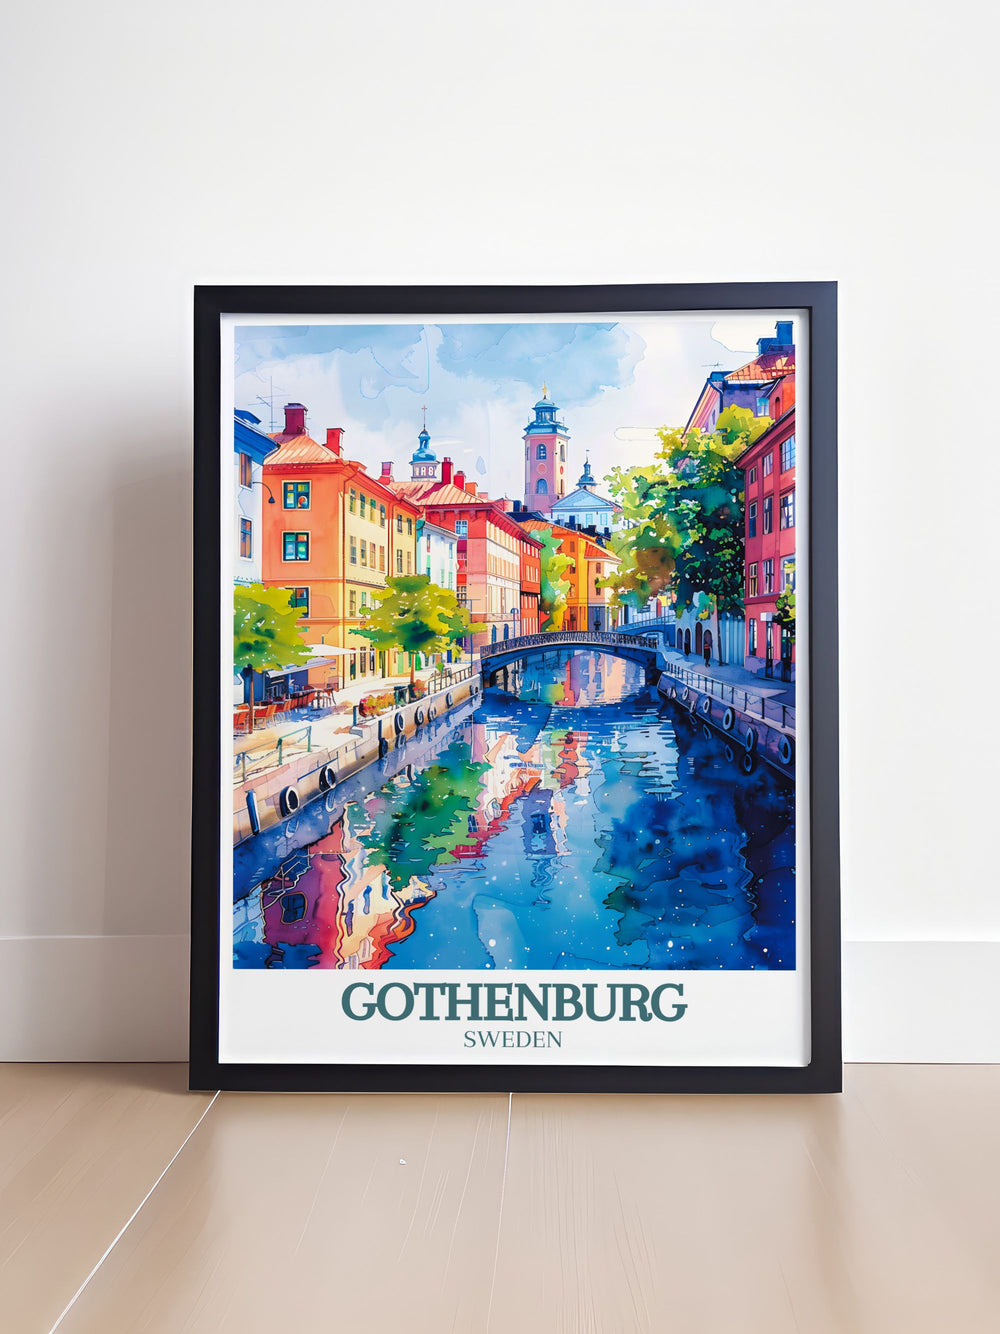 Bringing the charm of Gothenburg into your home, this travel poster showcases the citys serene canals and majestic architecture. Ideal for those who appreciate urban beauty and historical landmarks, this piece adds a touch of Swedish elegance to any room.